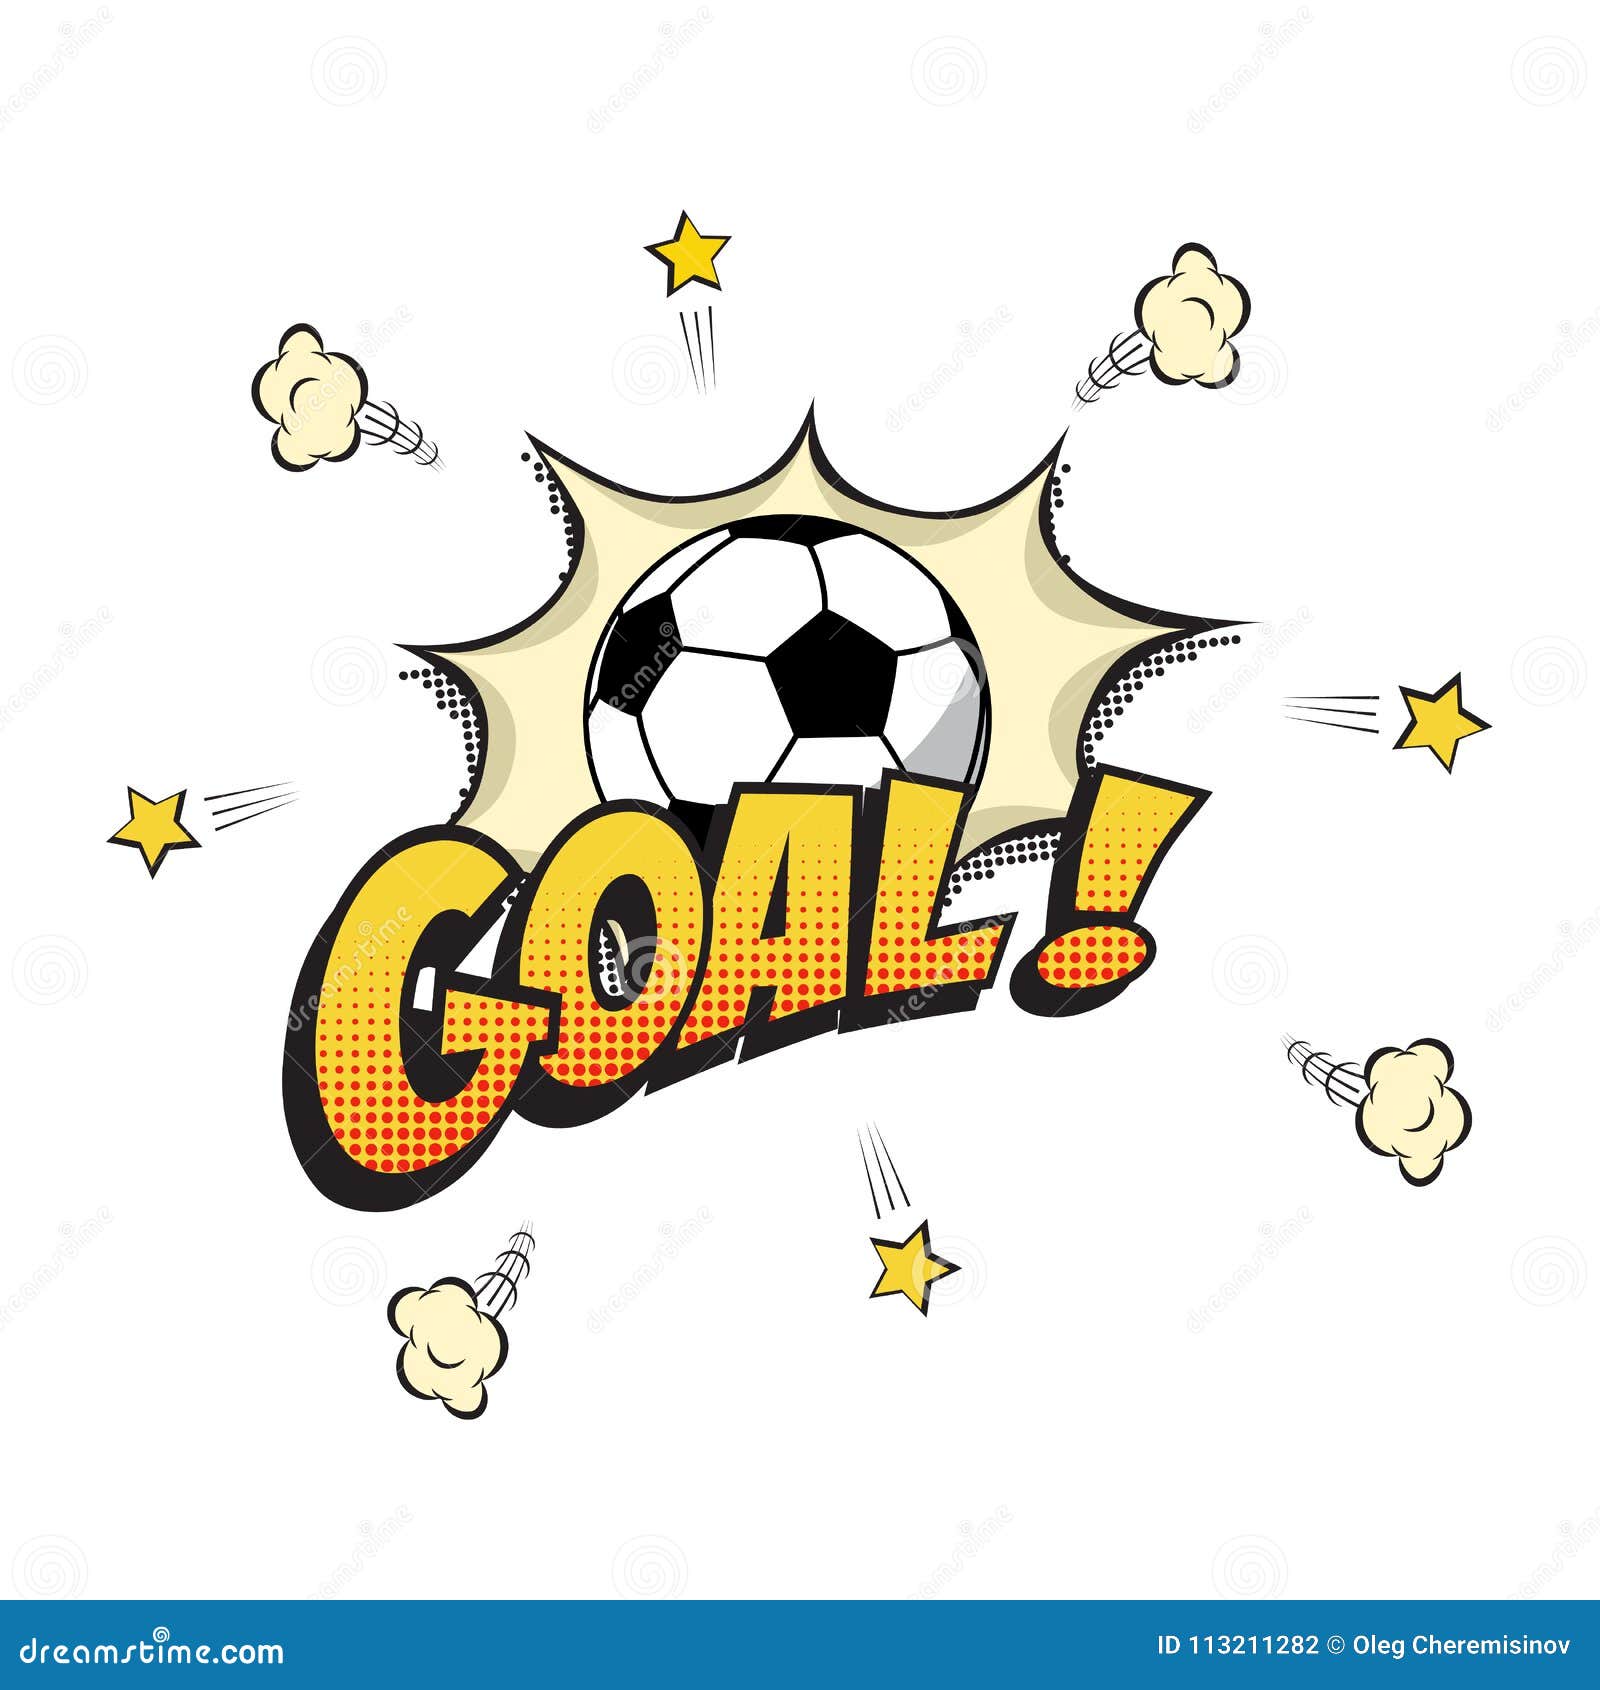 Goal Word With Football Ball In Cartoon Or Comic Book Style Vector Illustration Stock Vector Illustration Of Colorful Banner